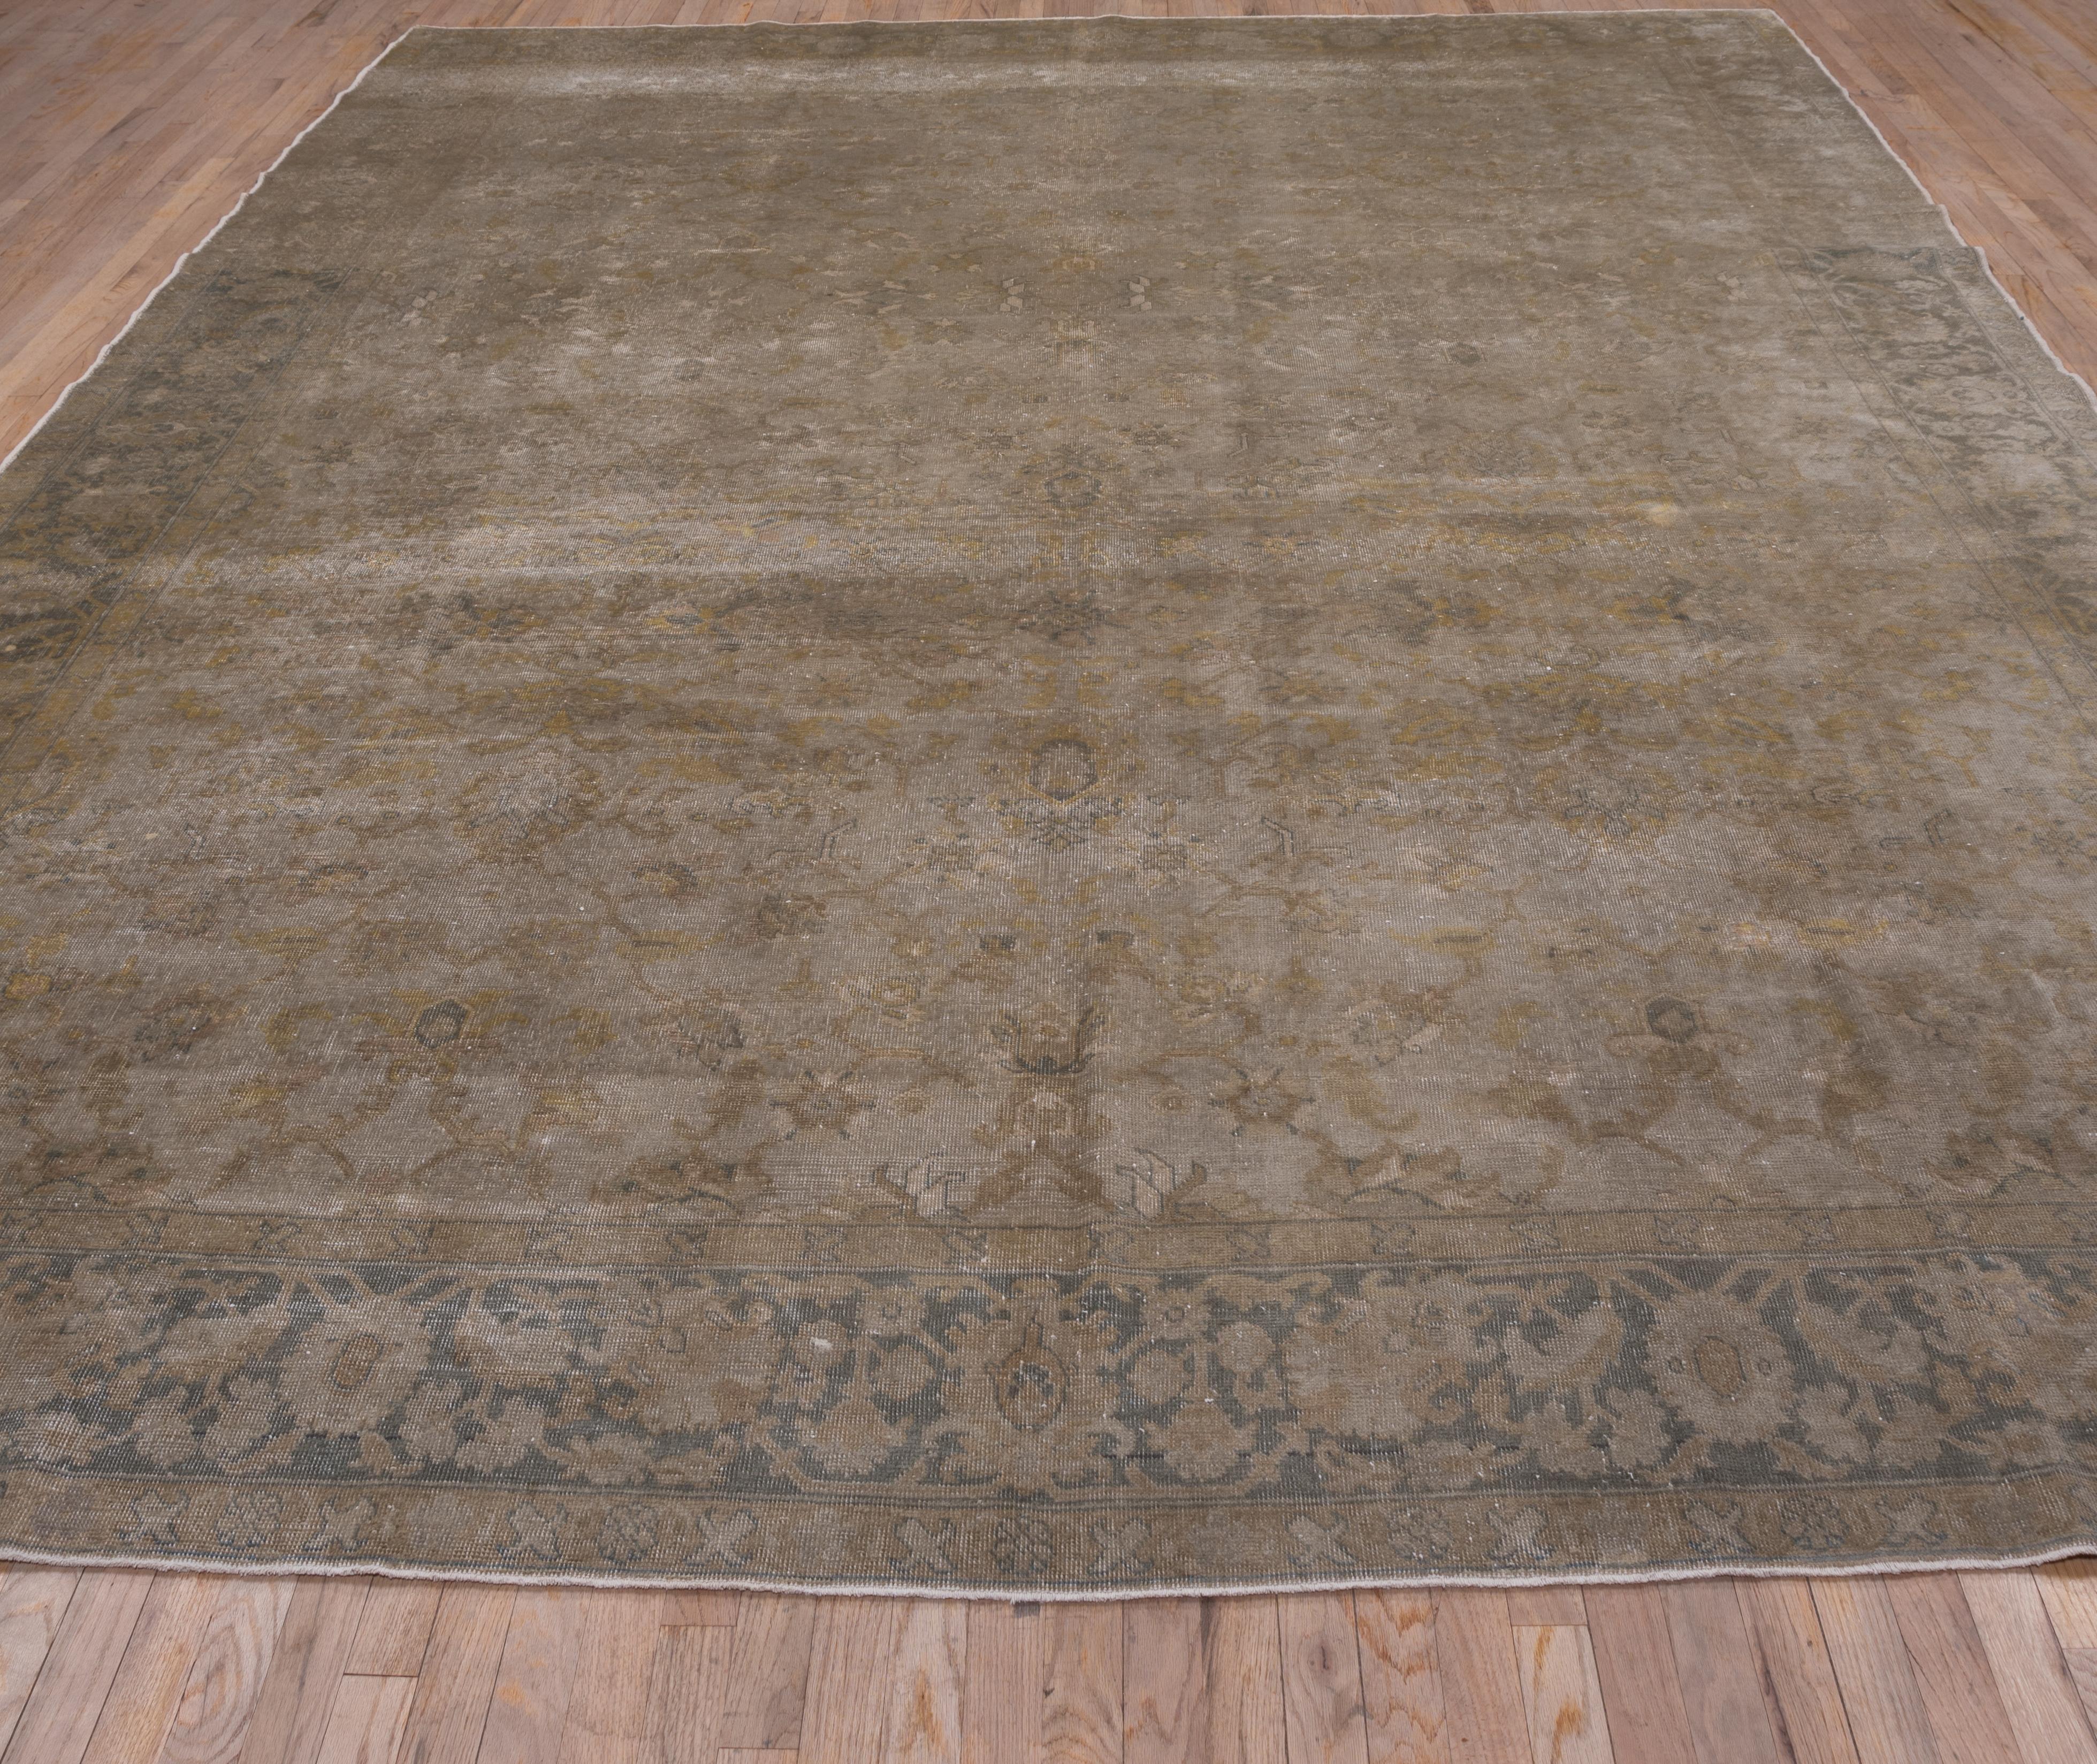 Antique Turkish Oushak Carpet, Earth Tones, Green Border, All-Over Field For Sale 2